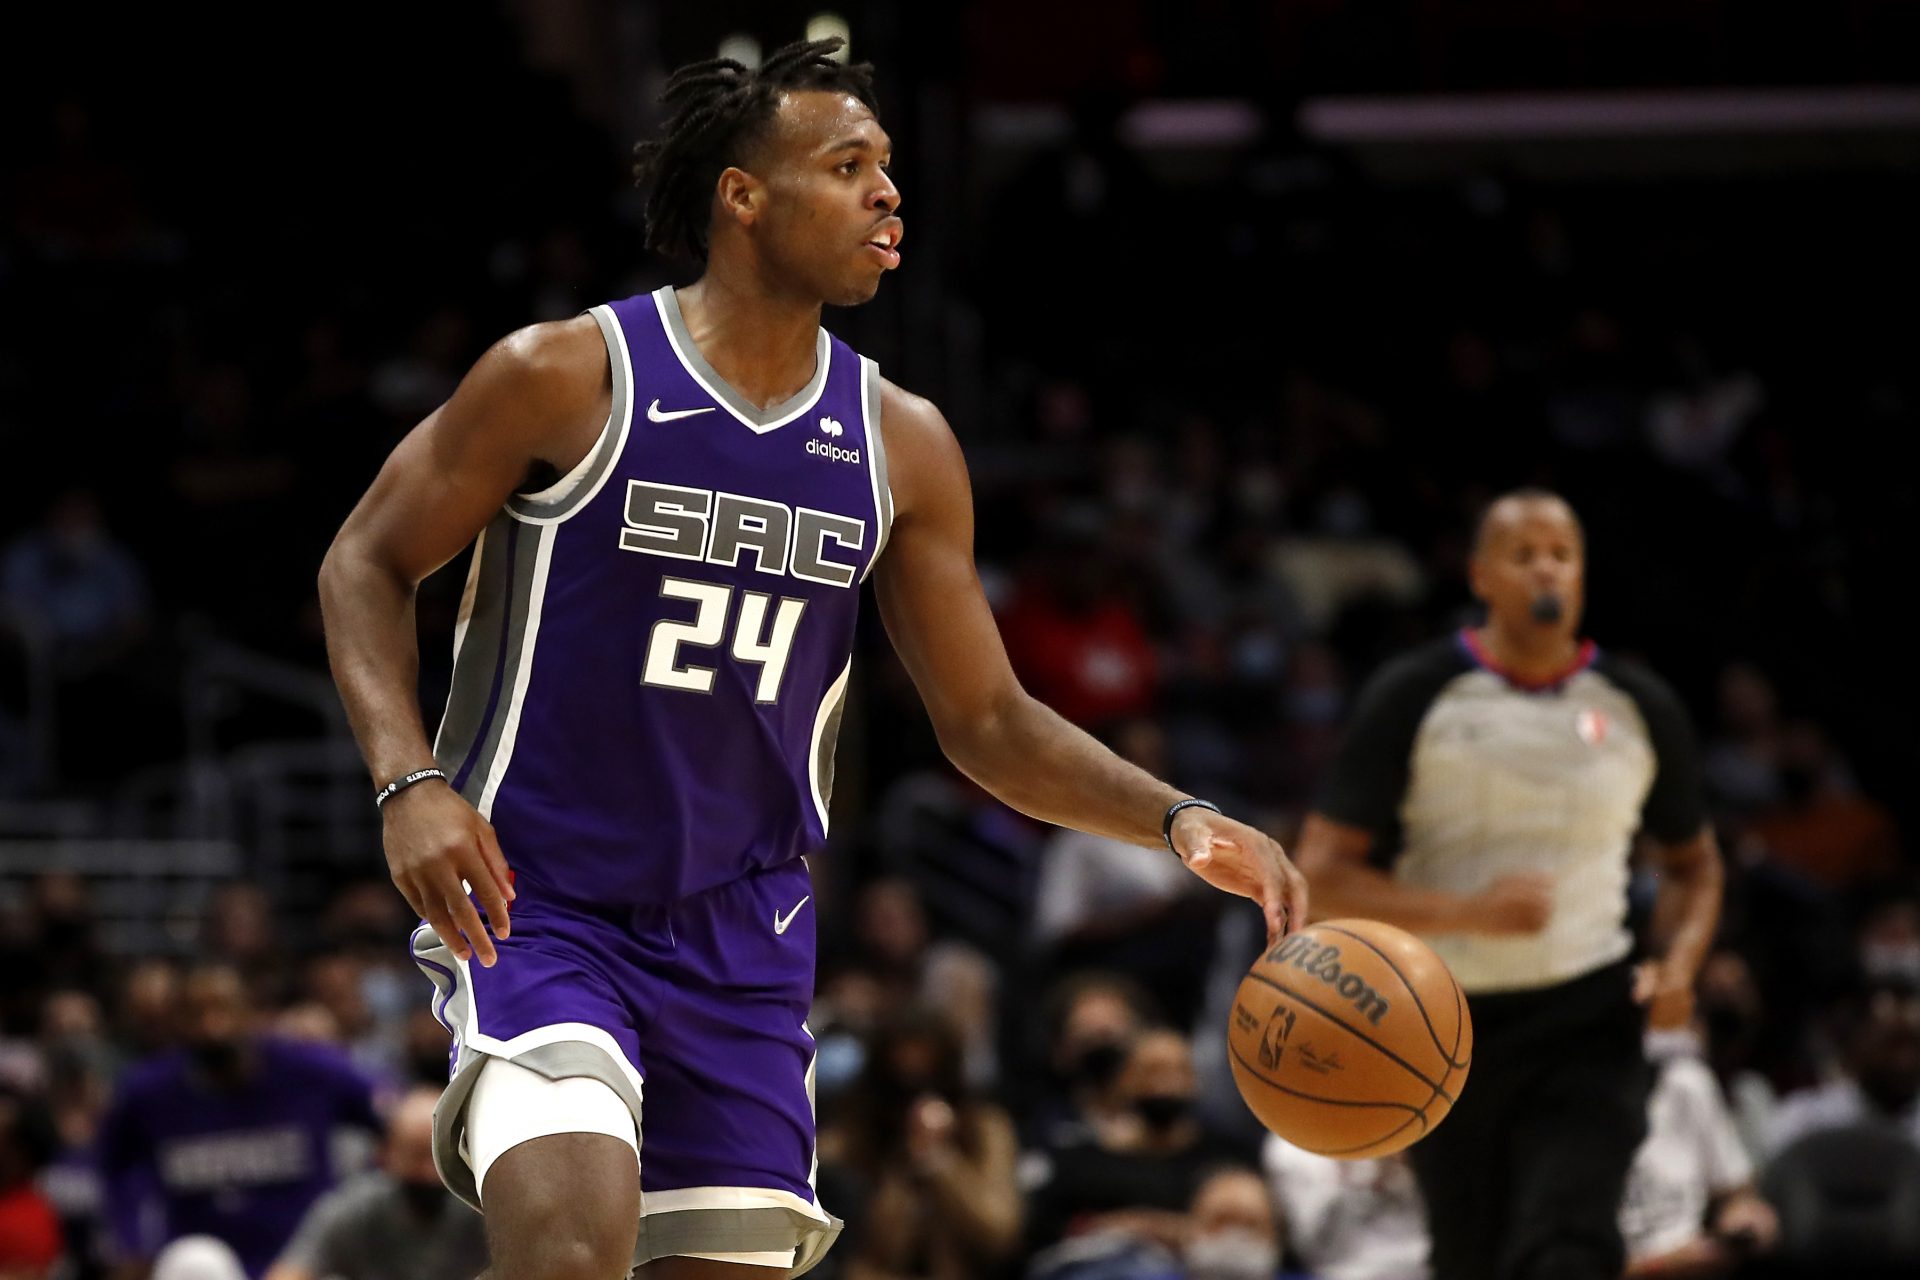 Buddy Hield Trade Rumors: Kings SG Is ‘Going to Be Long gone,’ Says NBA Exec